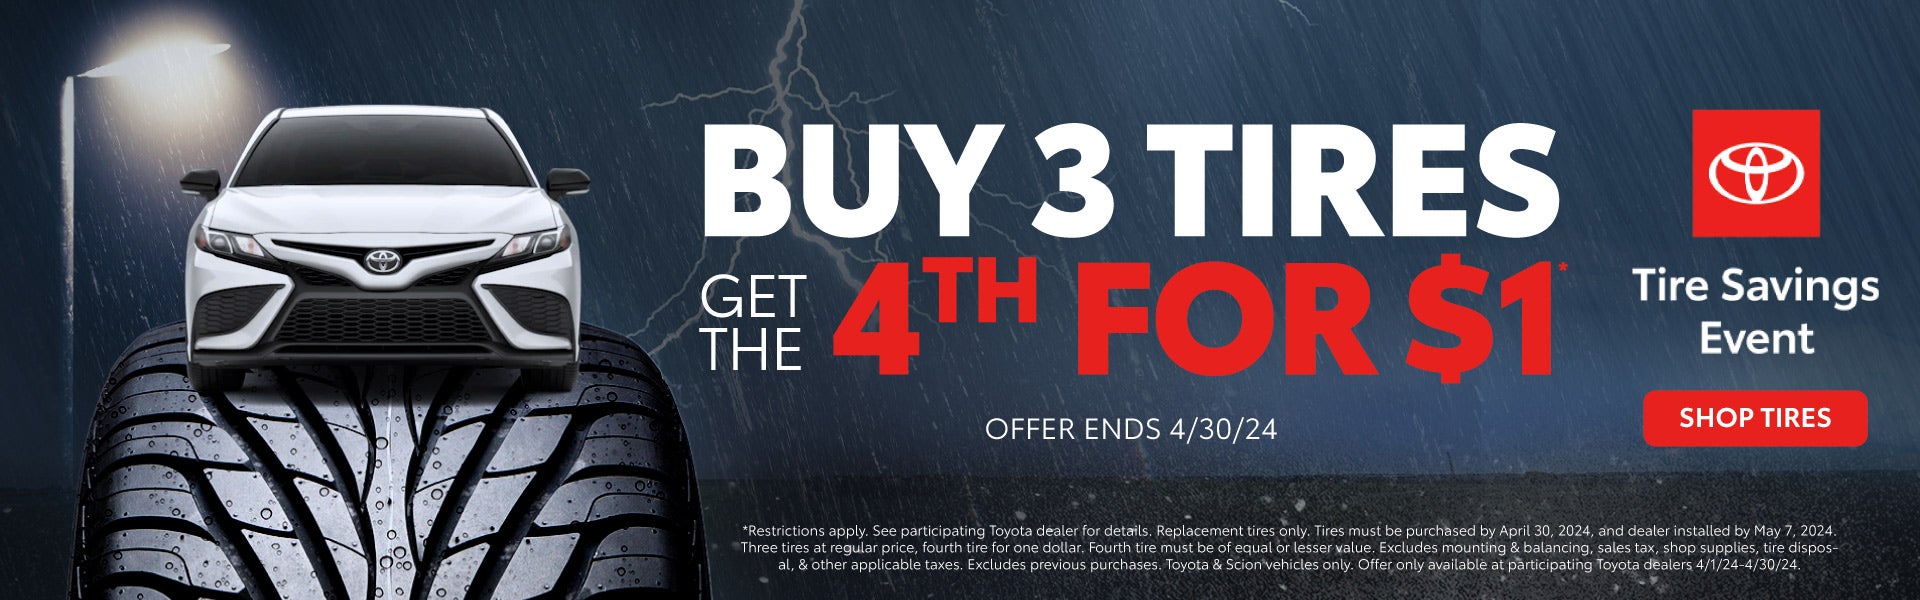 Buy 3 tires, get the 4th for $1. Click to shop tires.